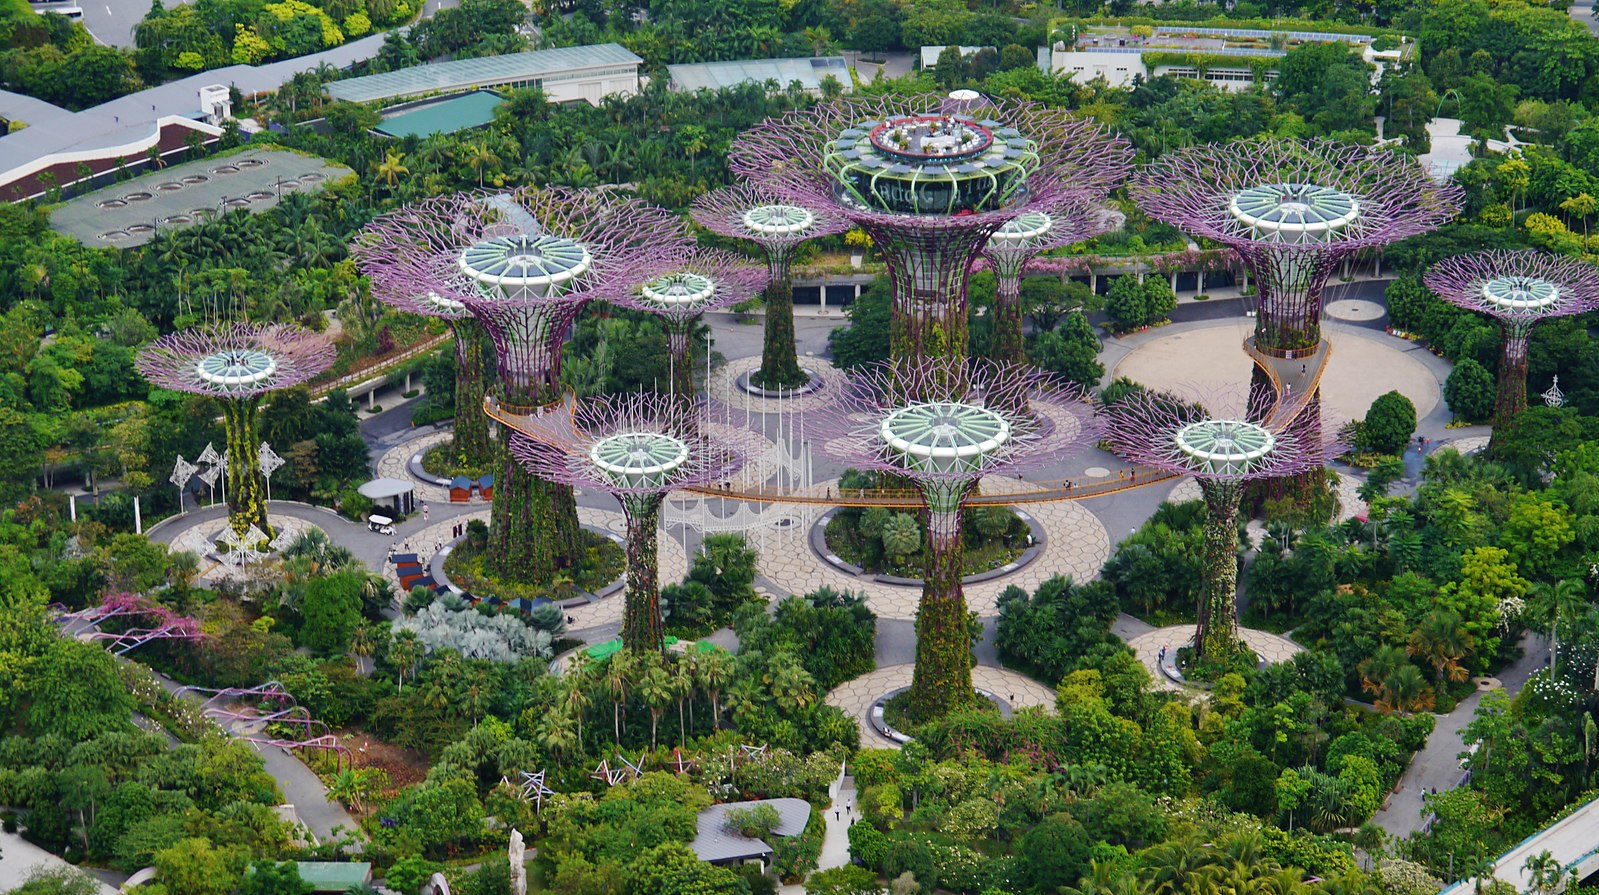 Ariel view of gardens and large metal structures